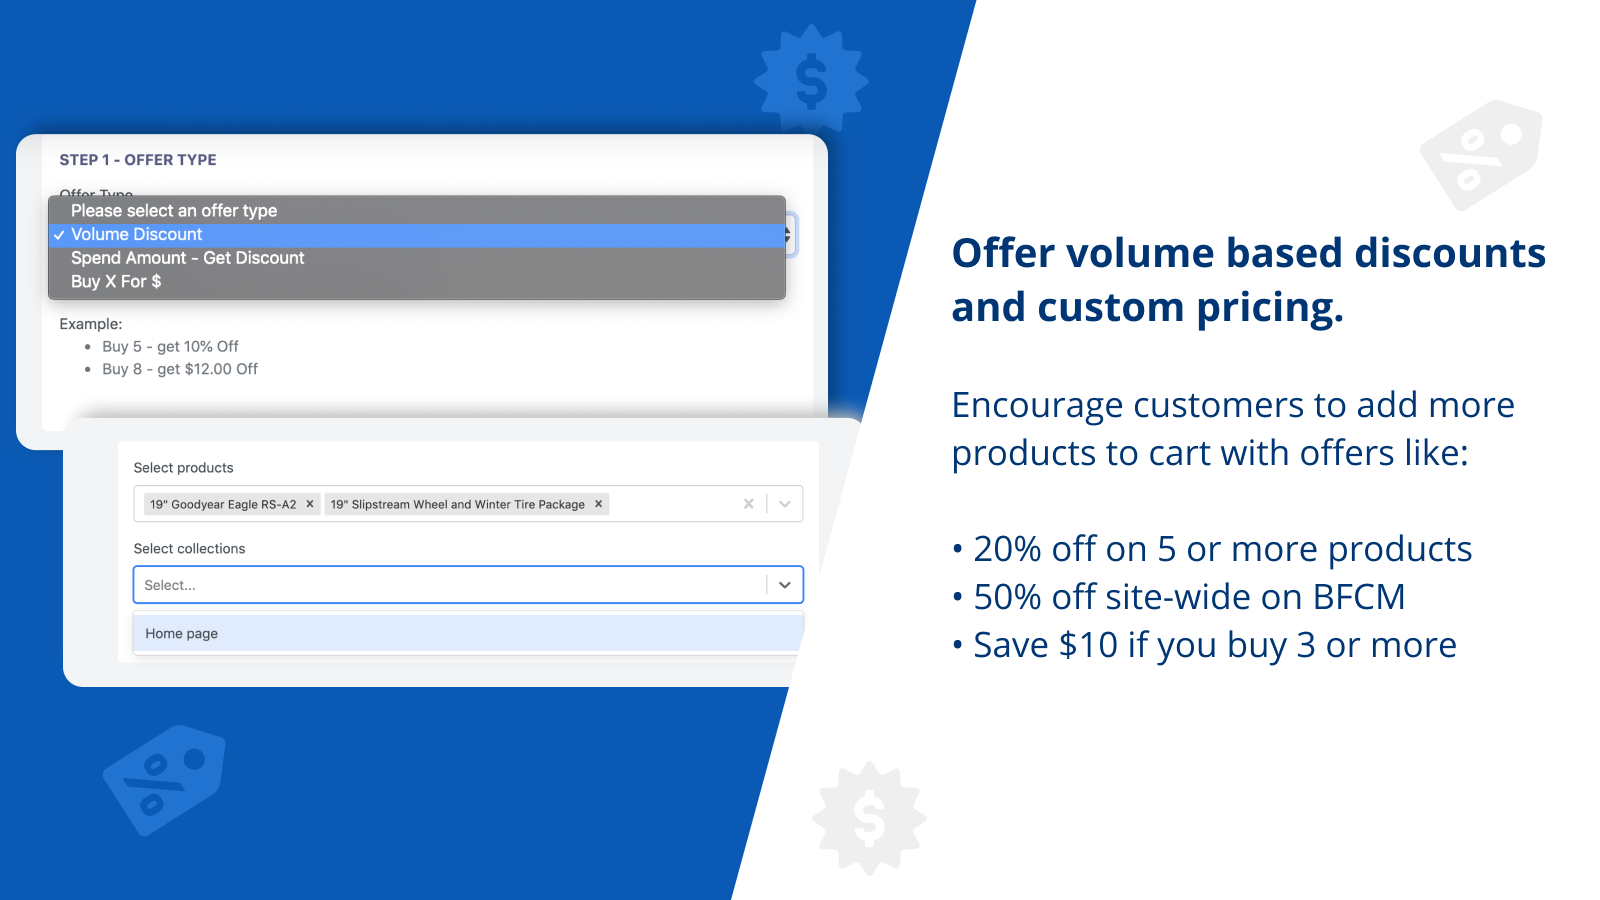 Offer volume and quantity-based custom pricing and discounts